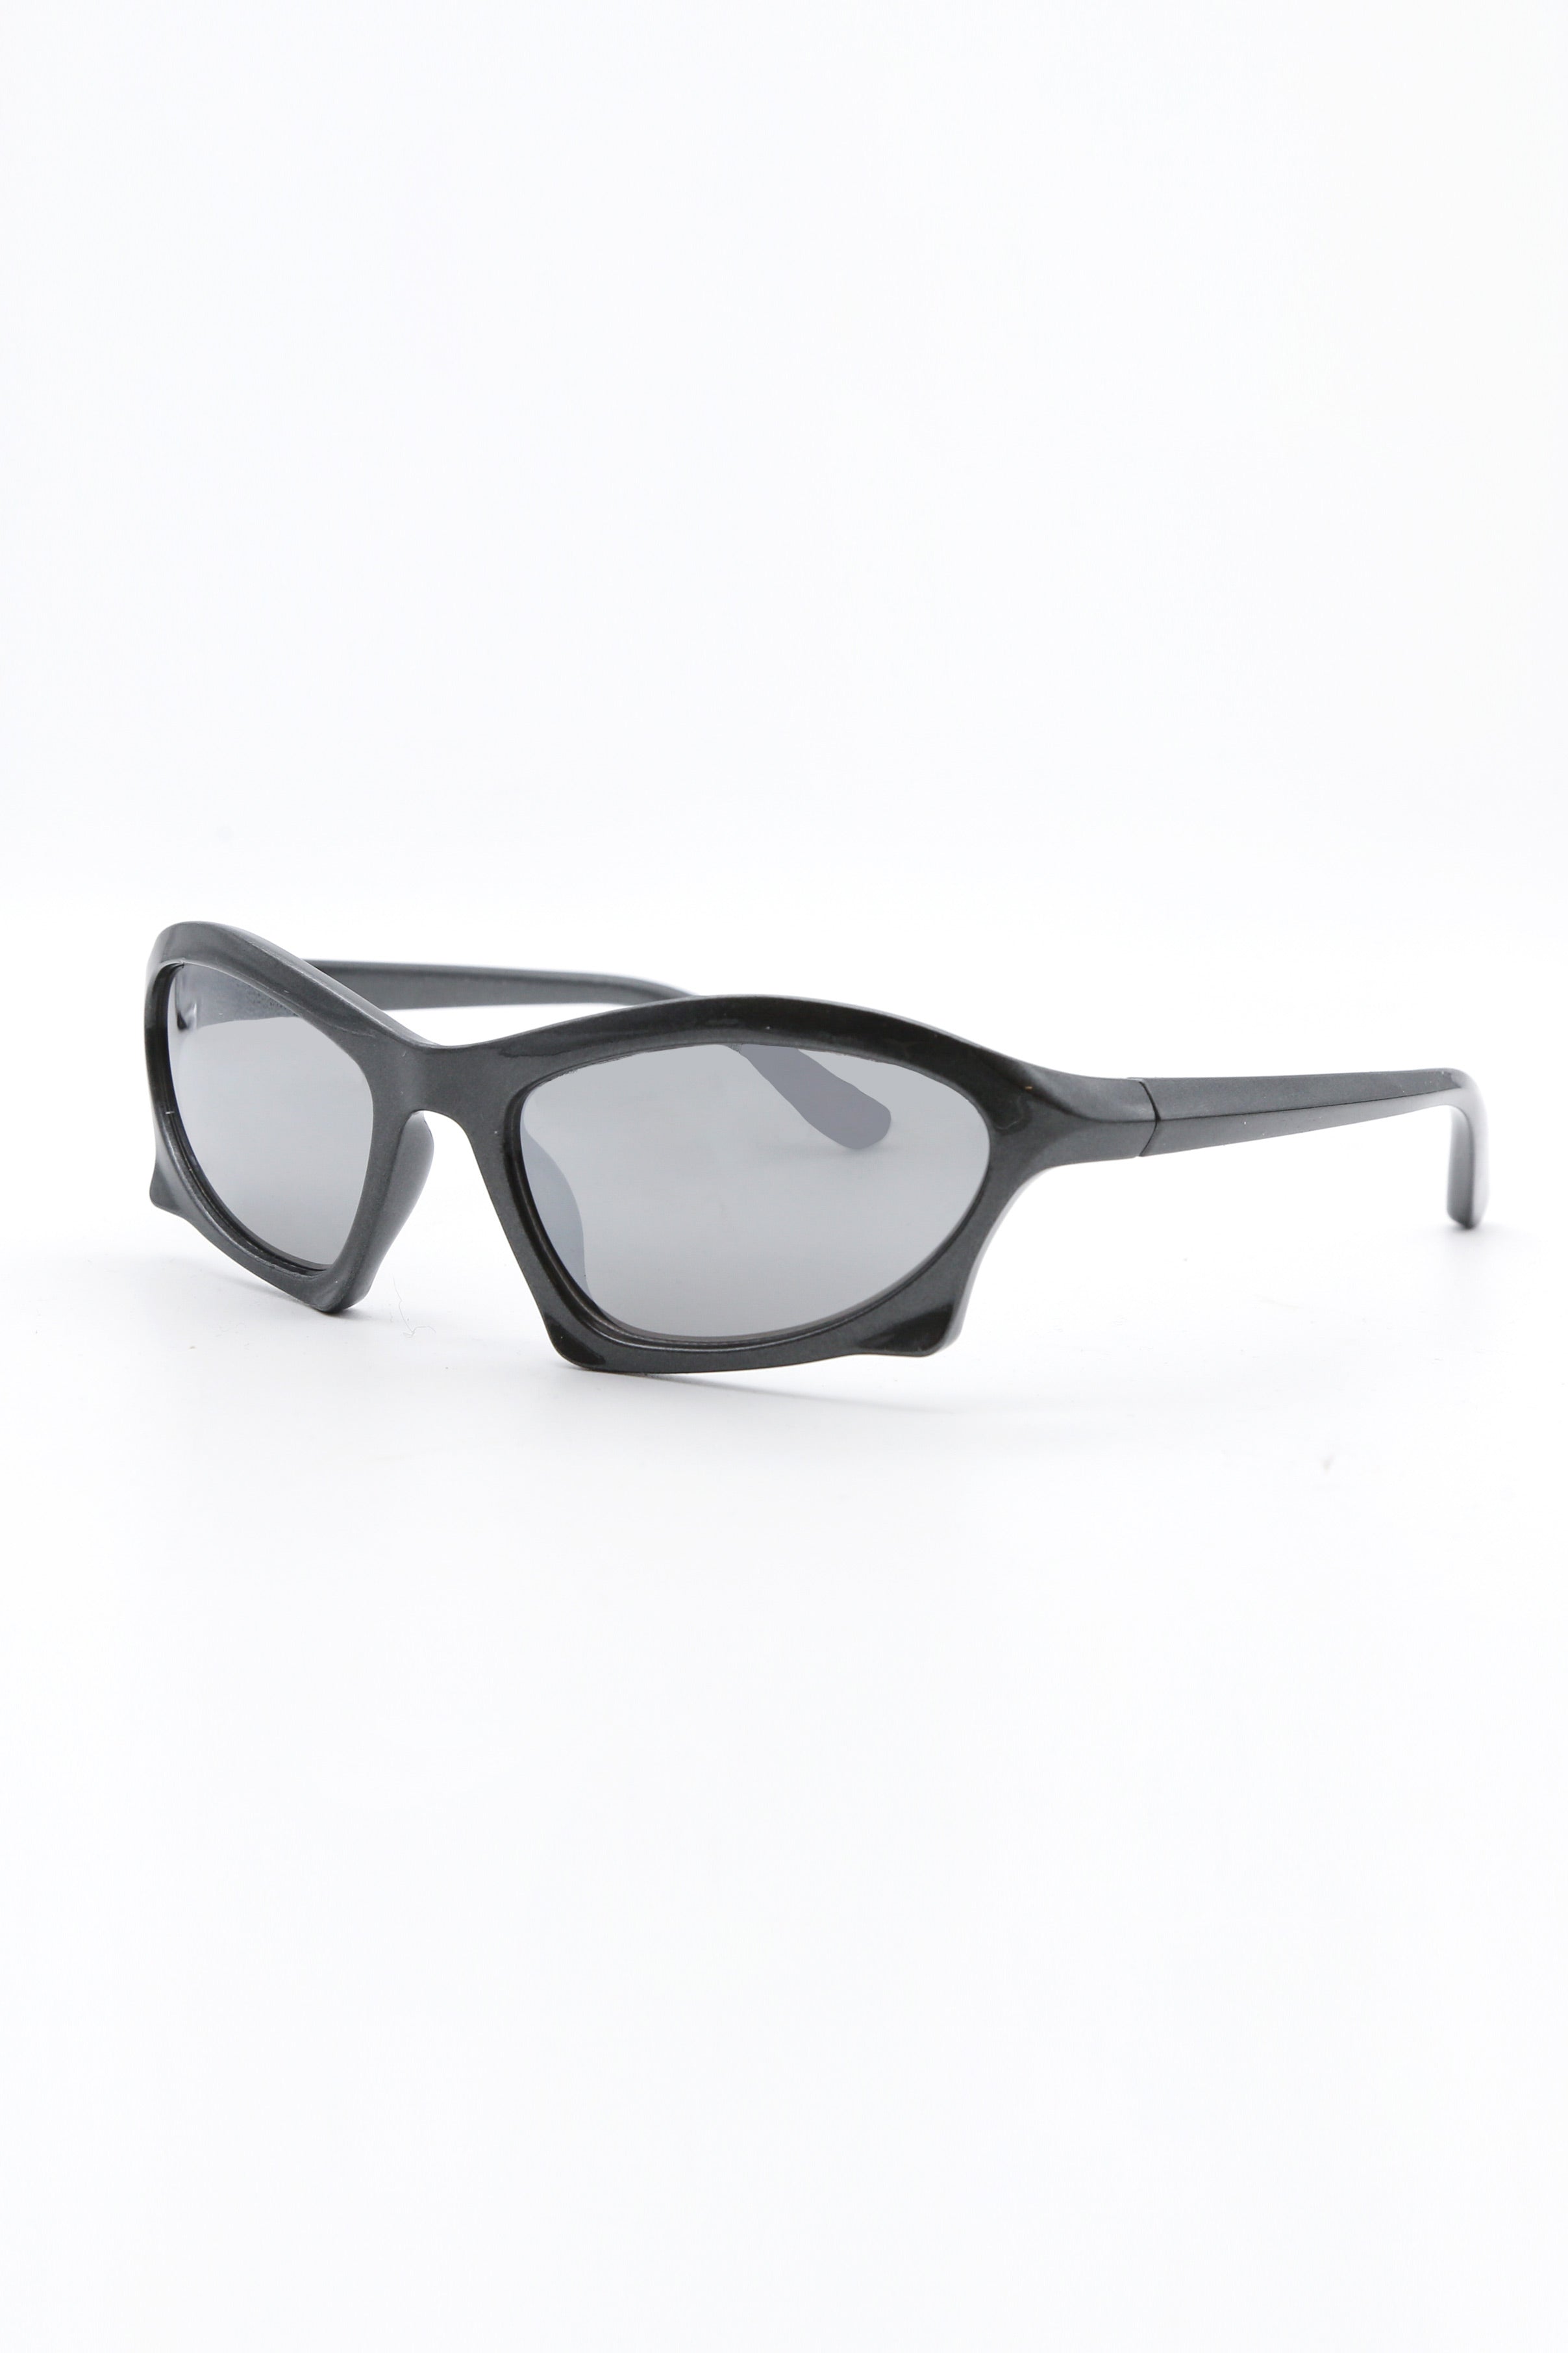 Structured Charcoal Sunglasses